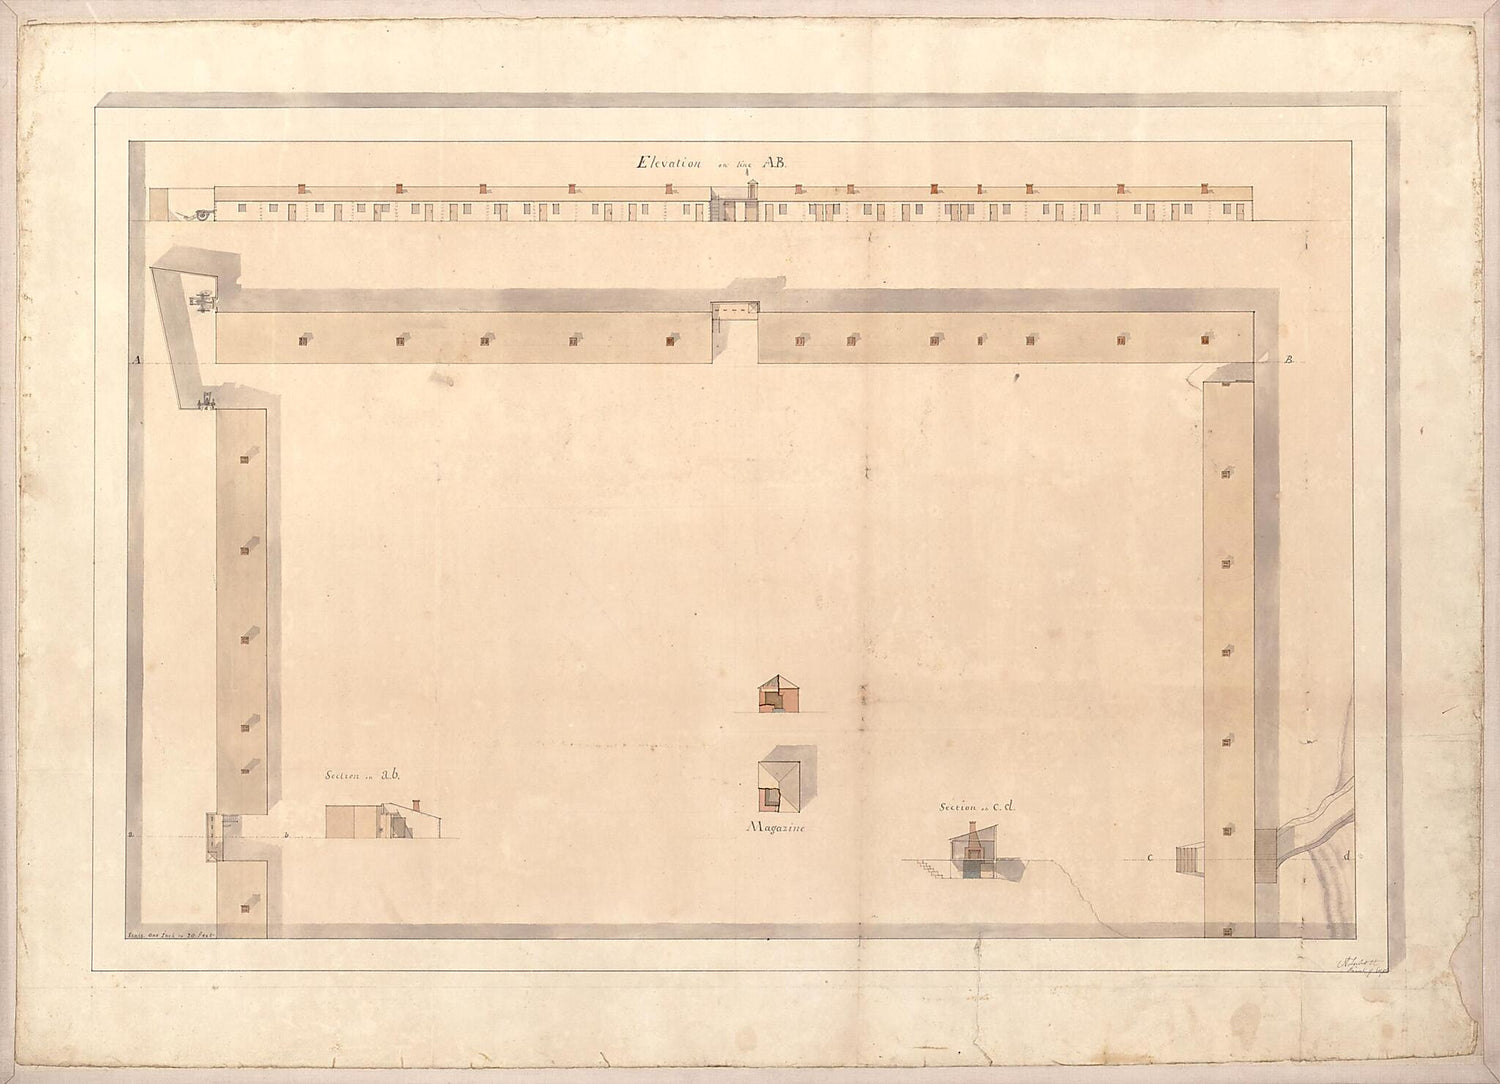 This old map of Plan of Fort Atkinson, Nebraska. (Defence sic at St. Louis) from 1819 was created by Andrew Talcott in 1819